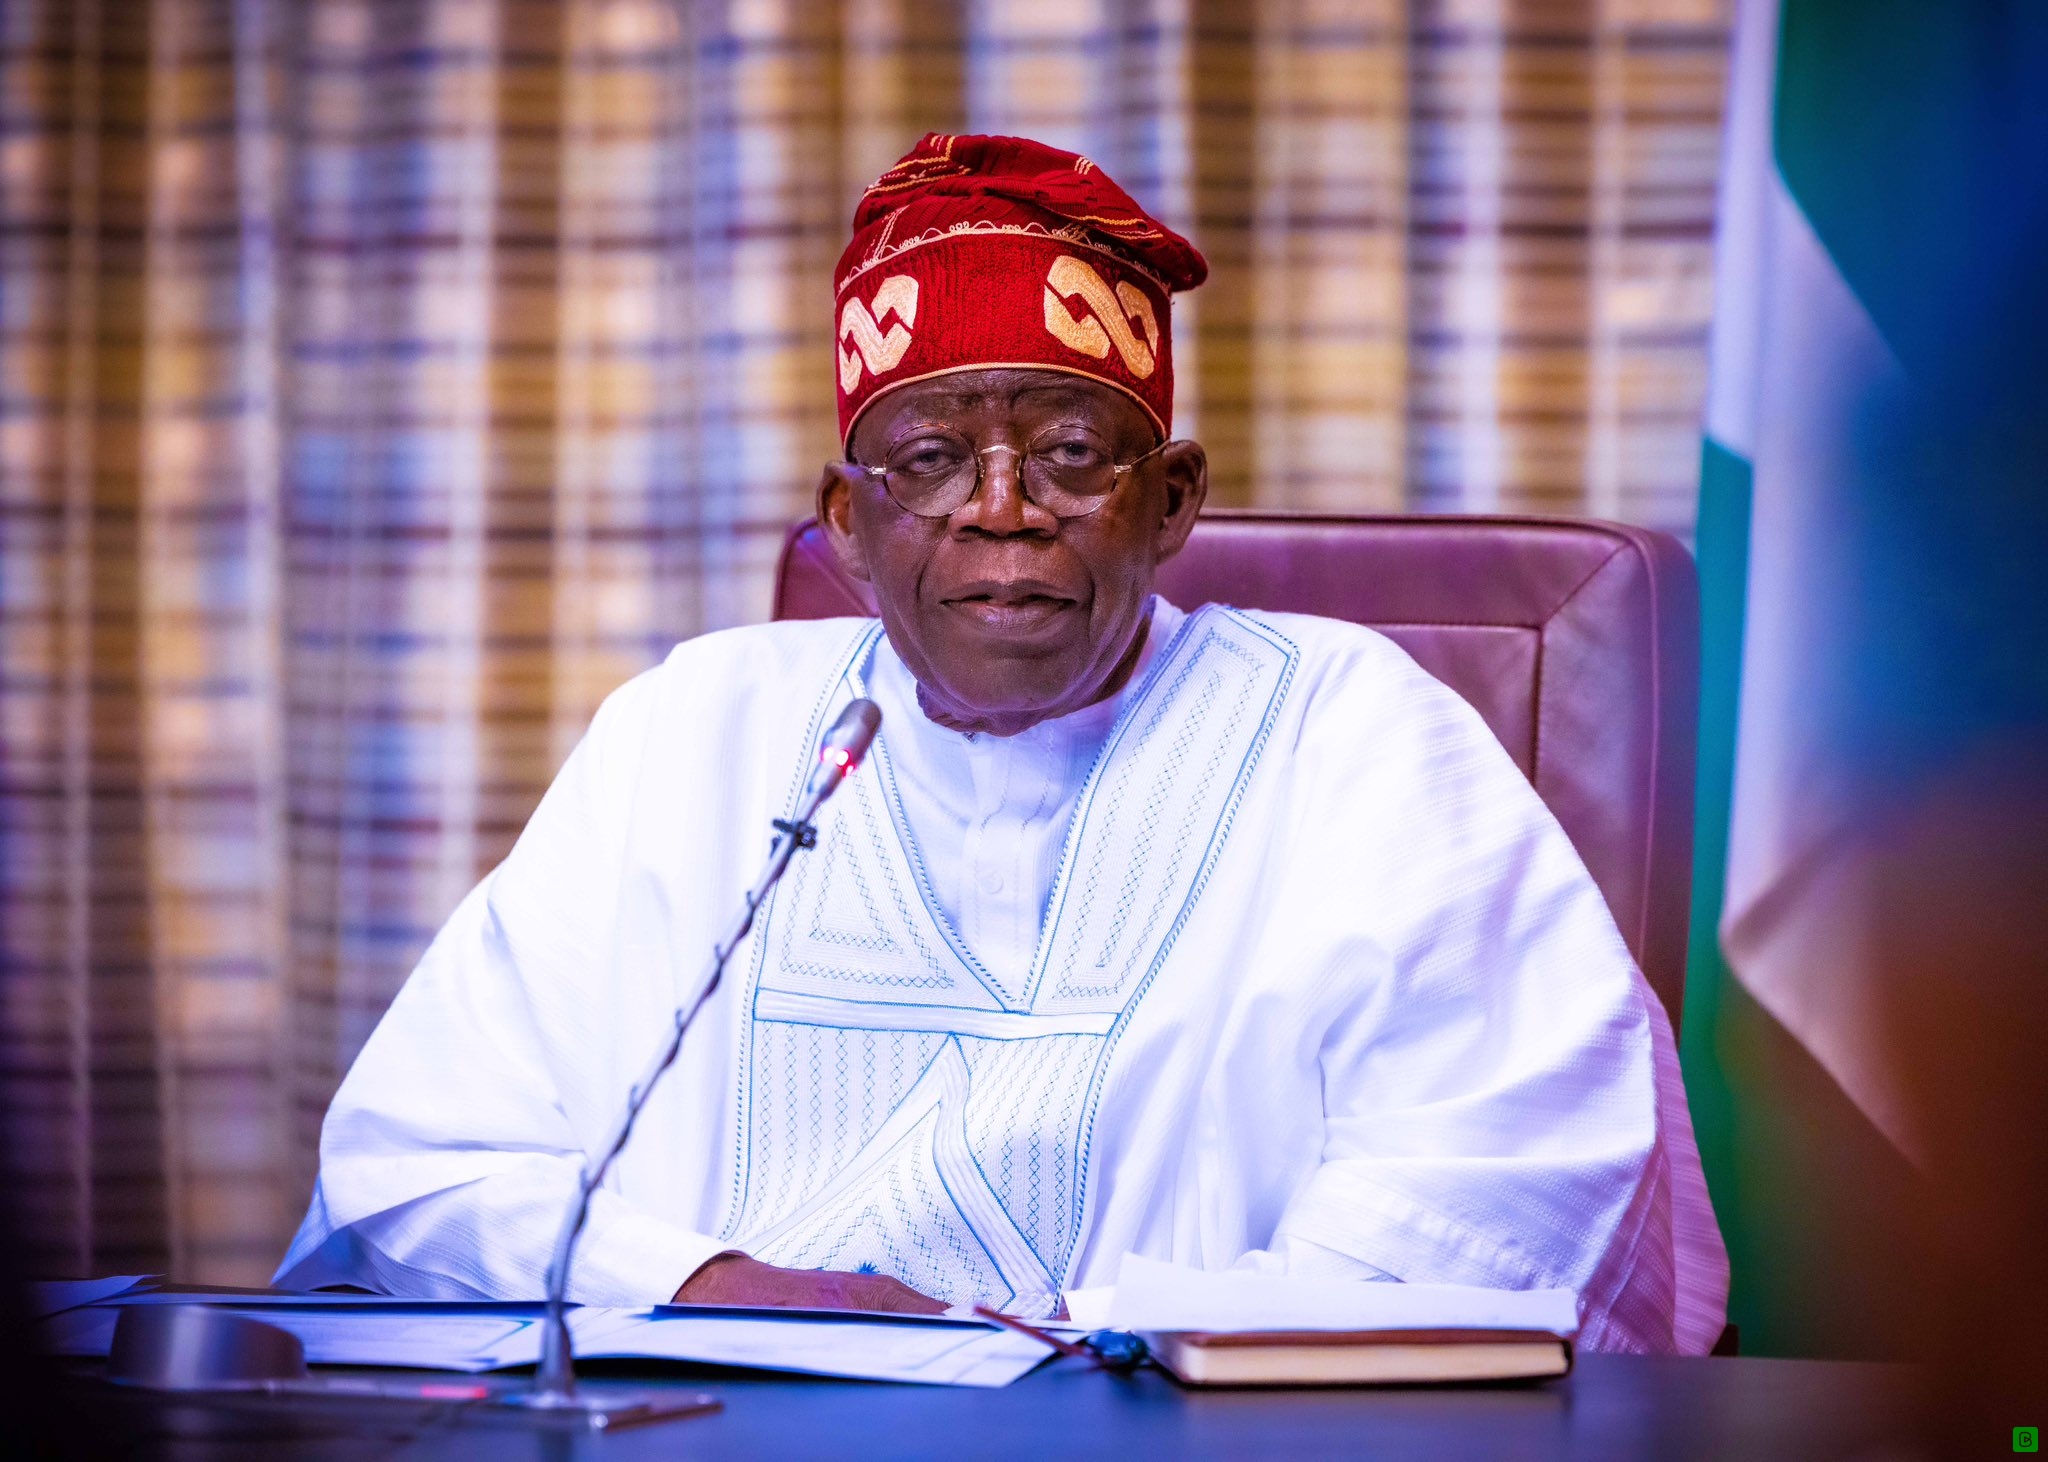 Pray for armed forces – Tinubu sends Christmas message to Nigerians